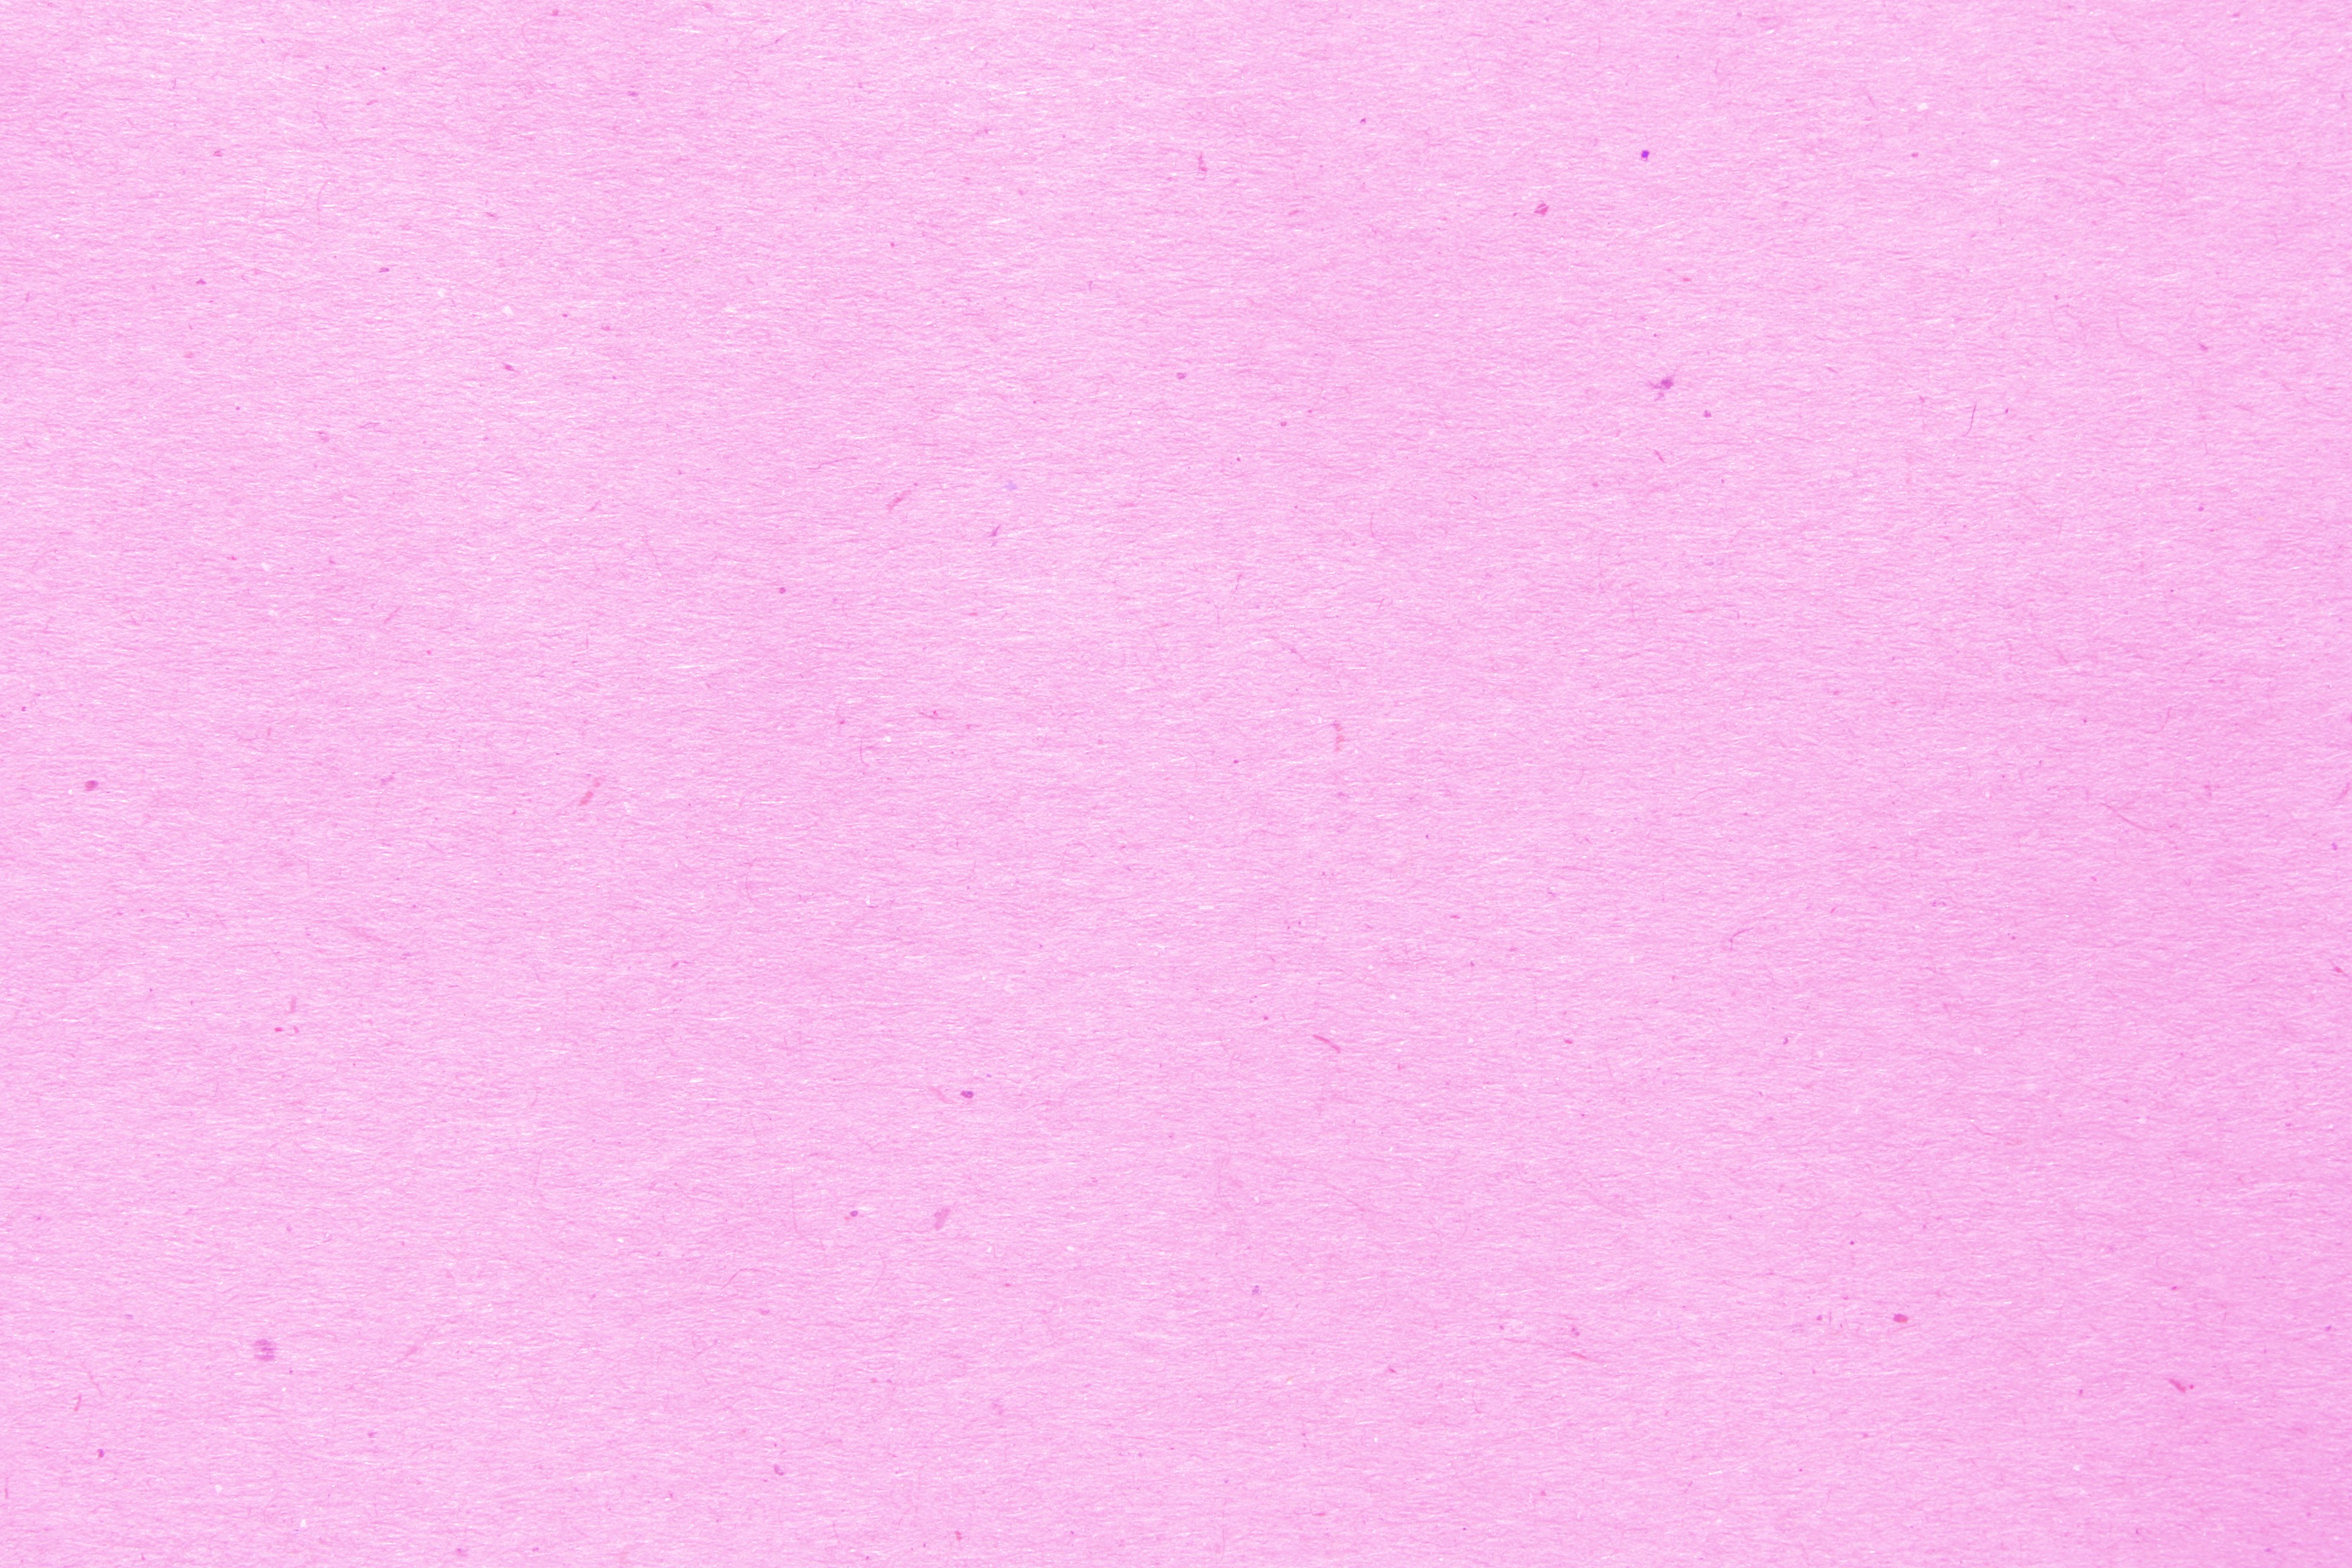 Pink Paper Texture with Flecks Picture | Free Photograph | Photos ...